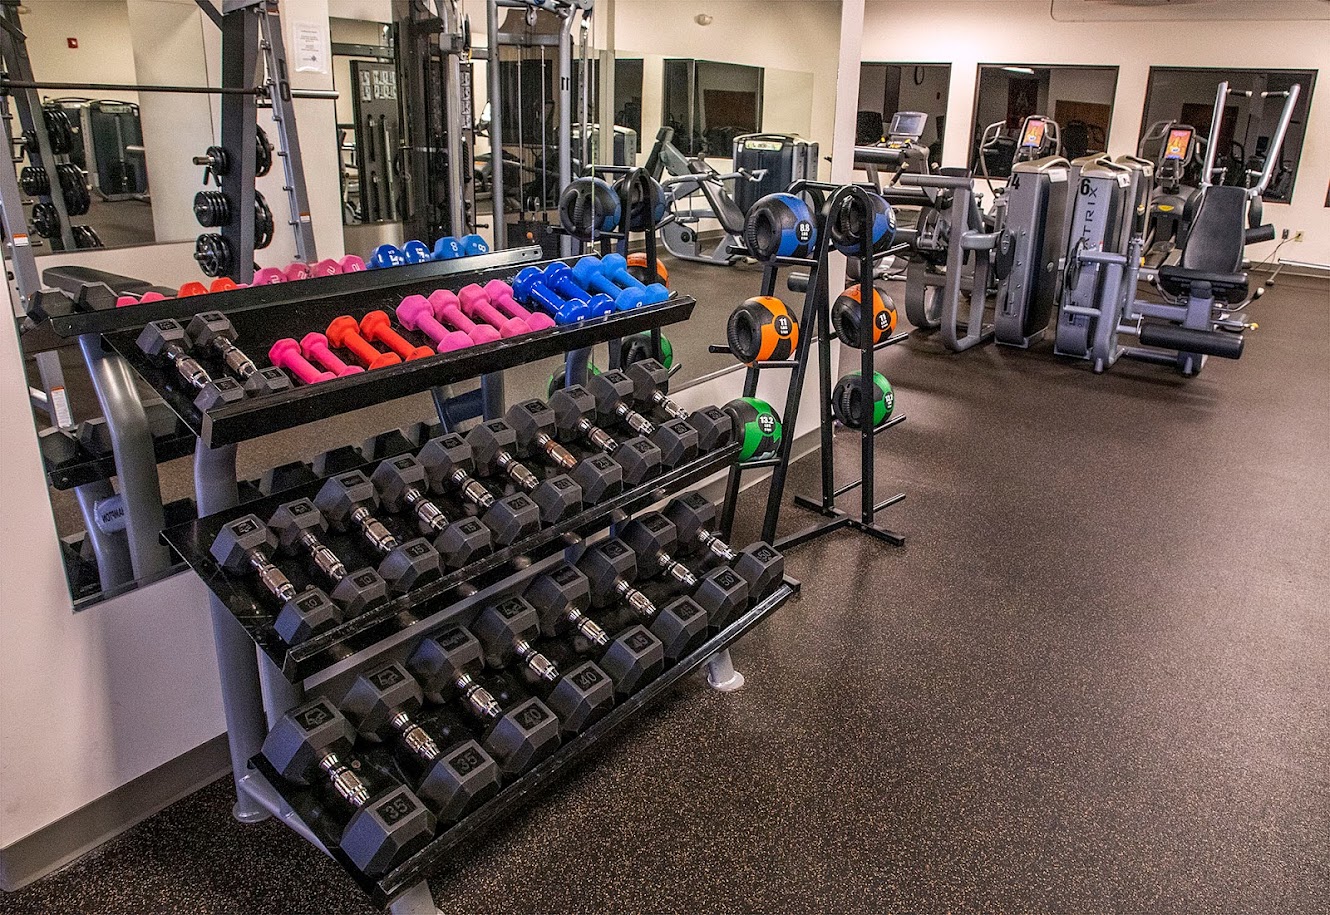 City of Marietta Custer Park Sports and Fitness Center